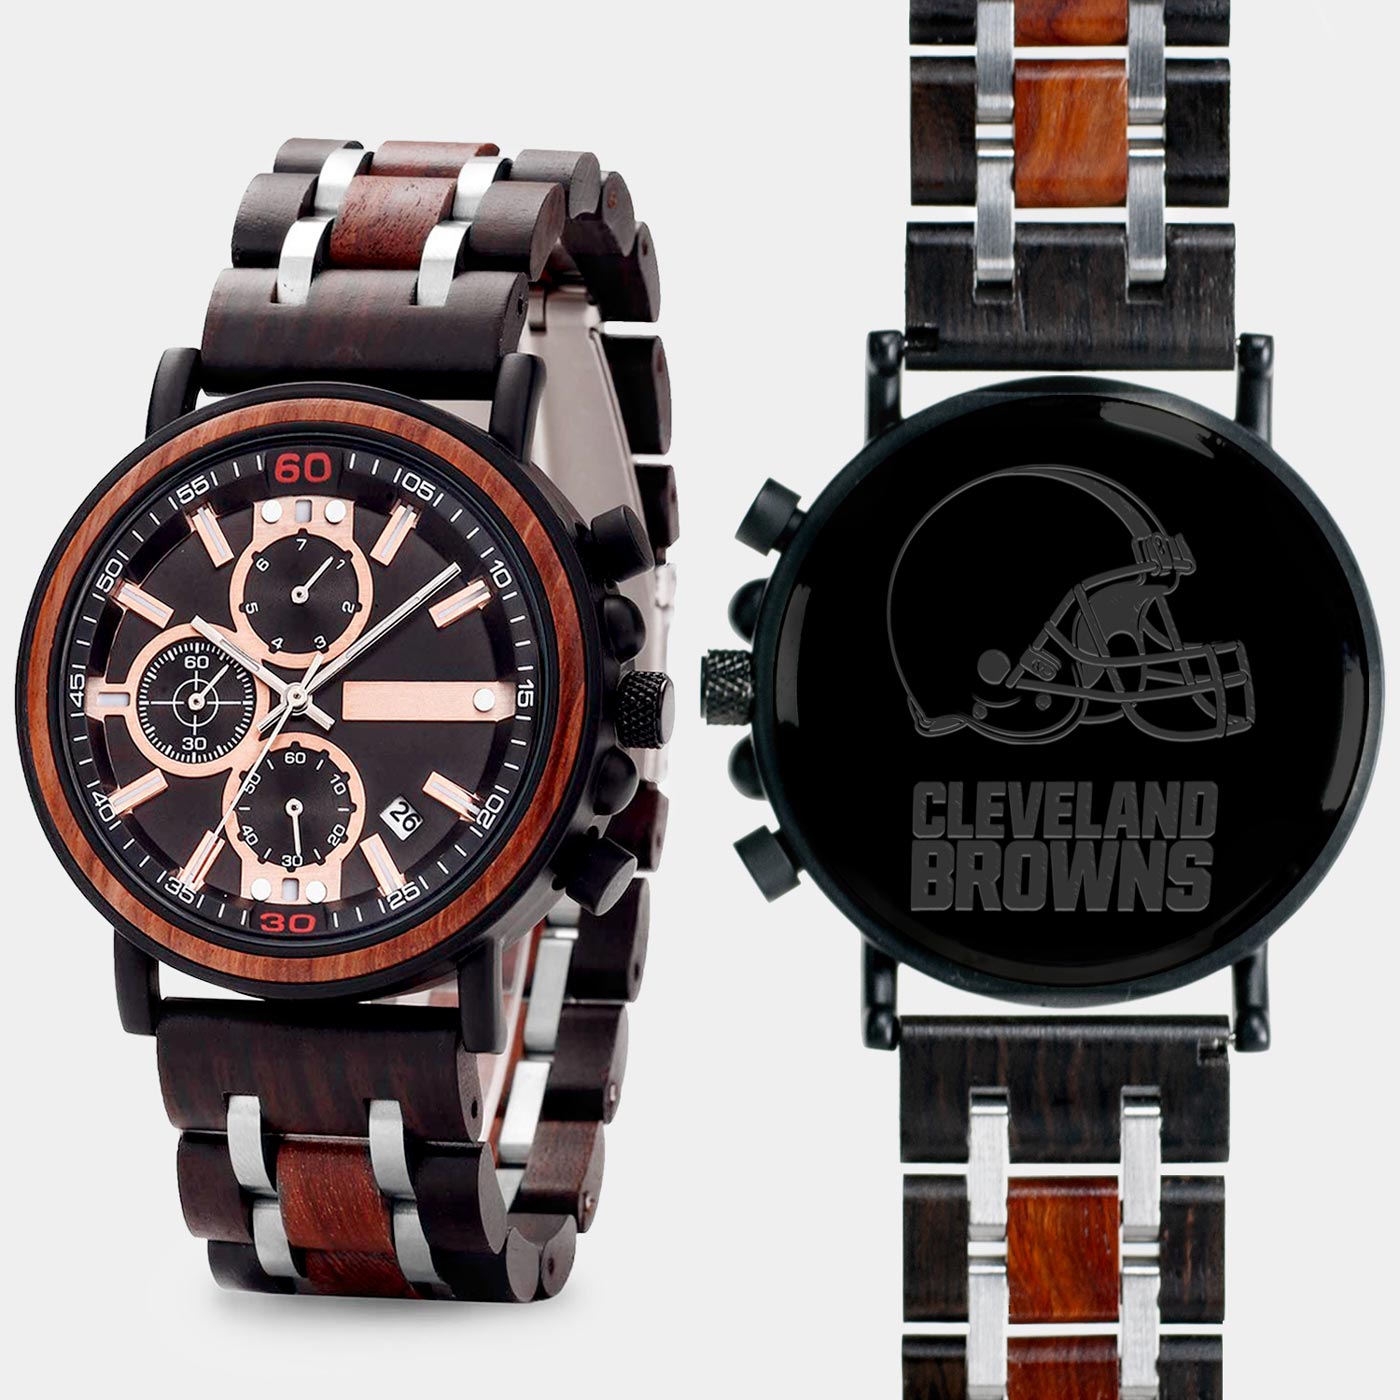 Cleveland Browns Mens Wrist Watch  - Personalized Cleveland Browns Mens Watches - Custom Gifts For Him, Birthday Gifts, Gift For Dad - Best 2022 Cleveland Browns Christmas Gifts - Black 45mm NFL Wood Watch - By Engraved In Nature